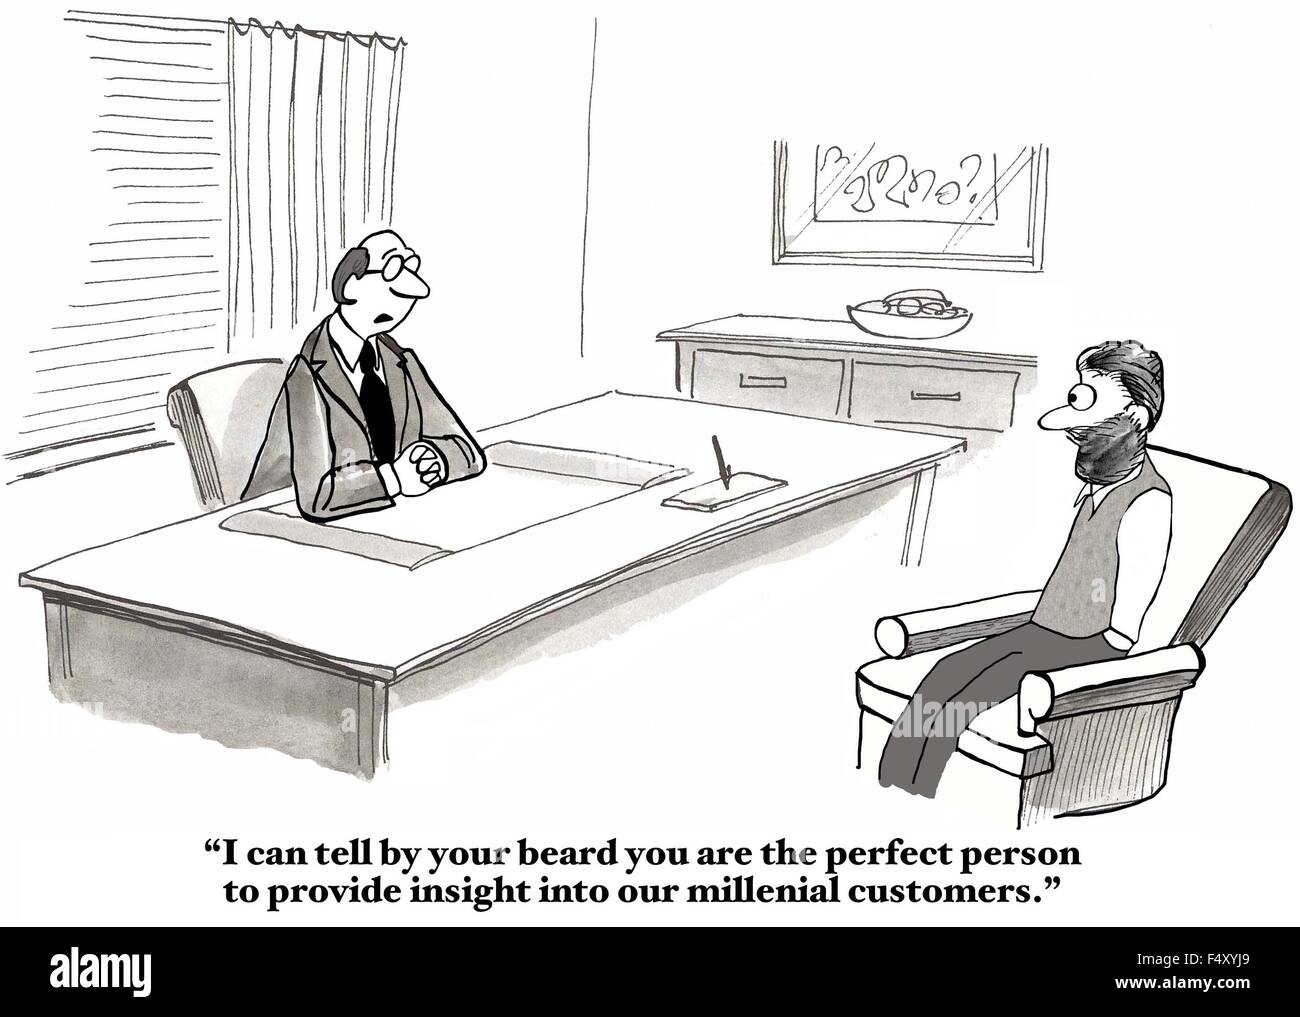 Business cartoon of man saying to consultant, 'I can tell by your beard... perfect person... insight... millennial customers'. Stock Photo